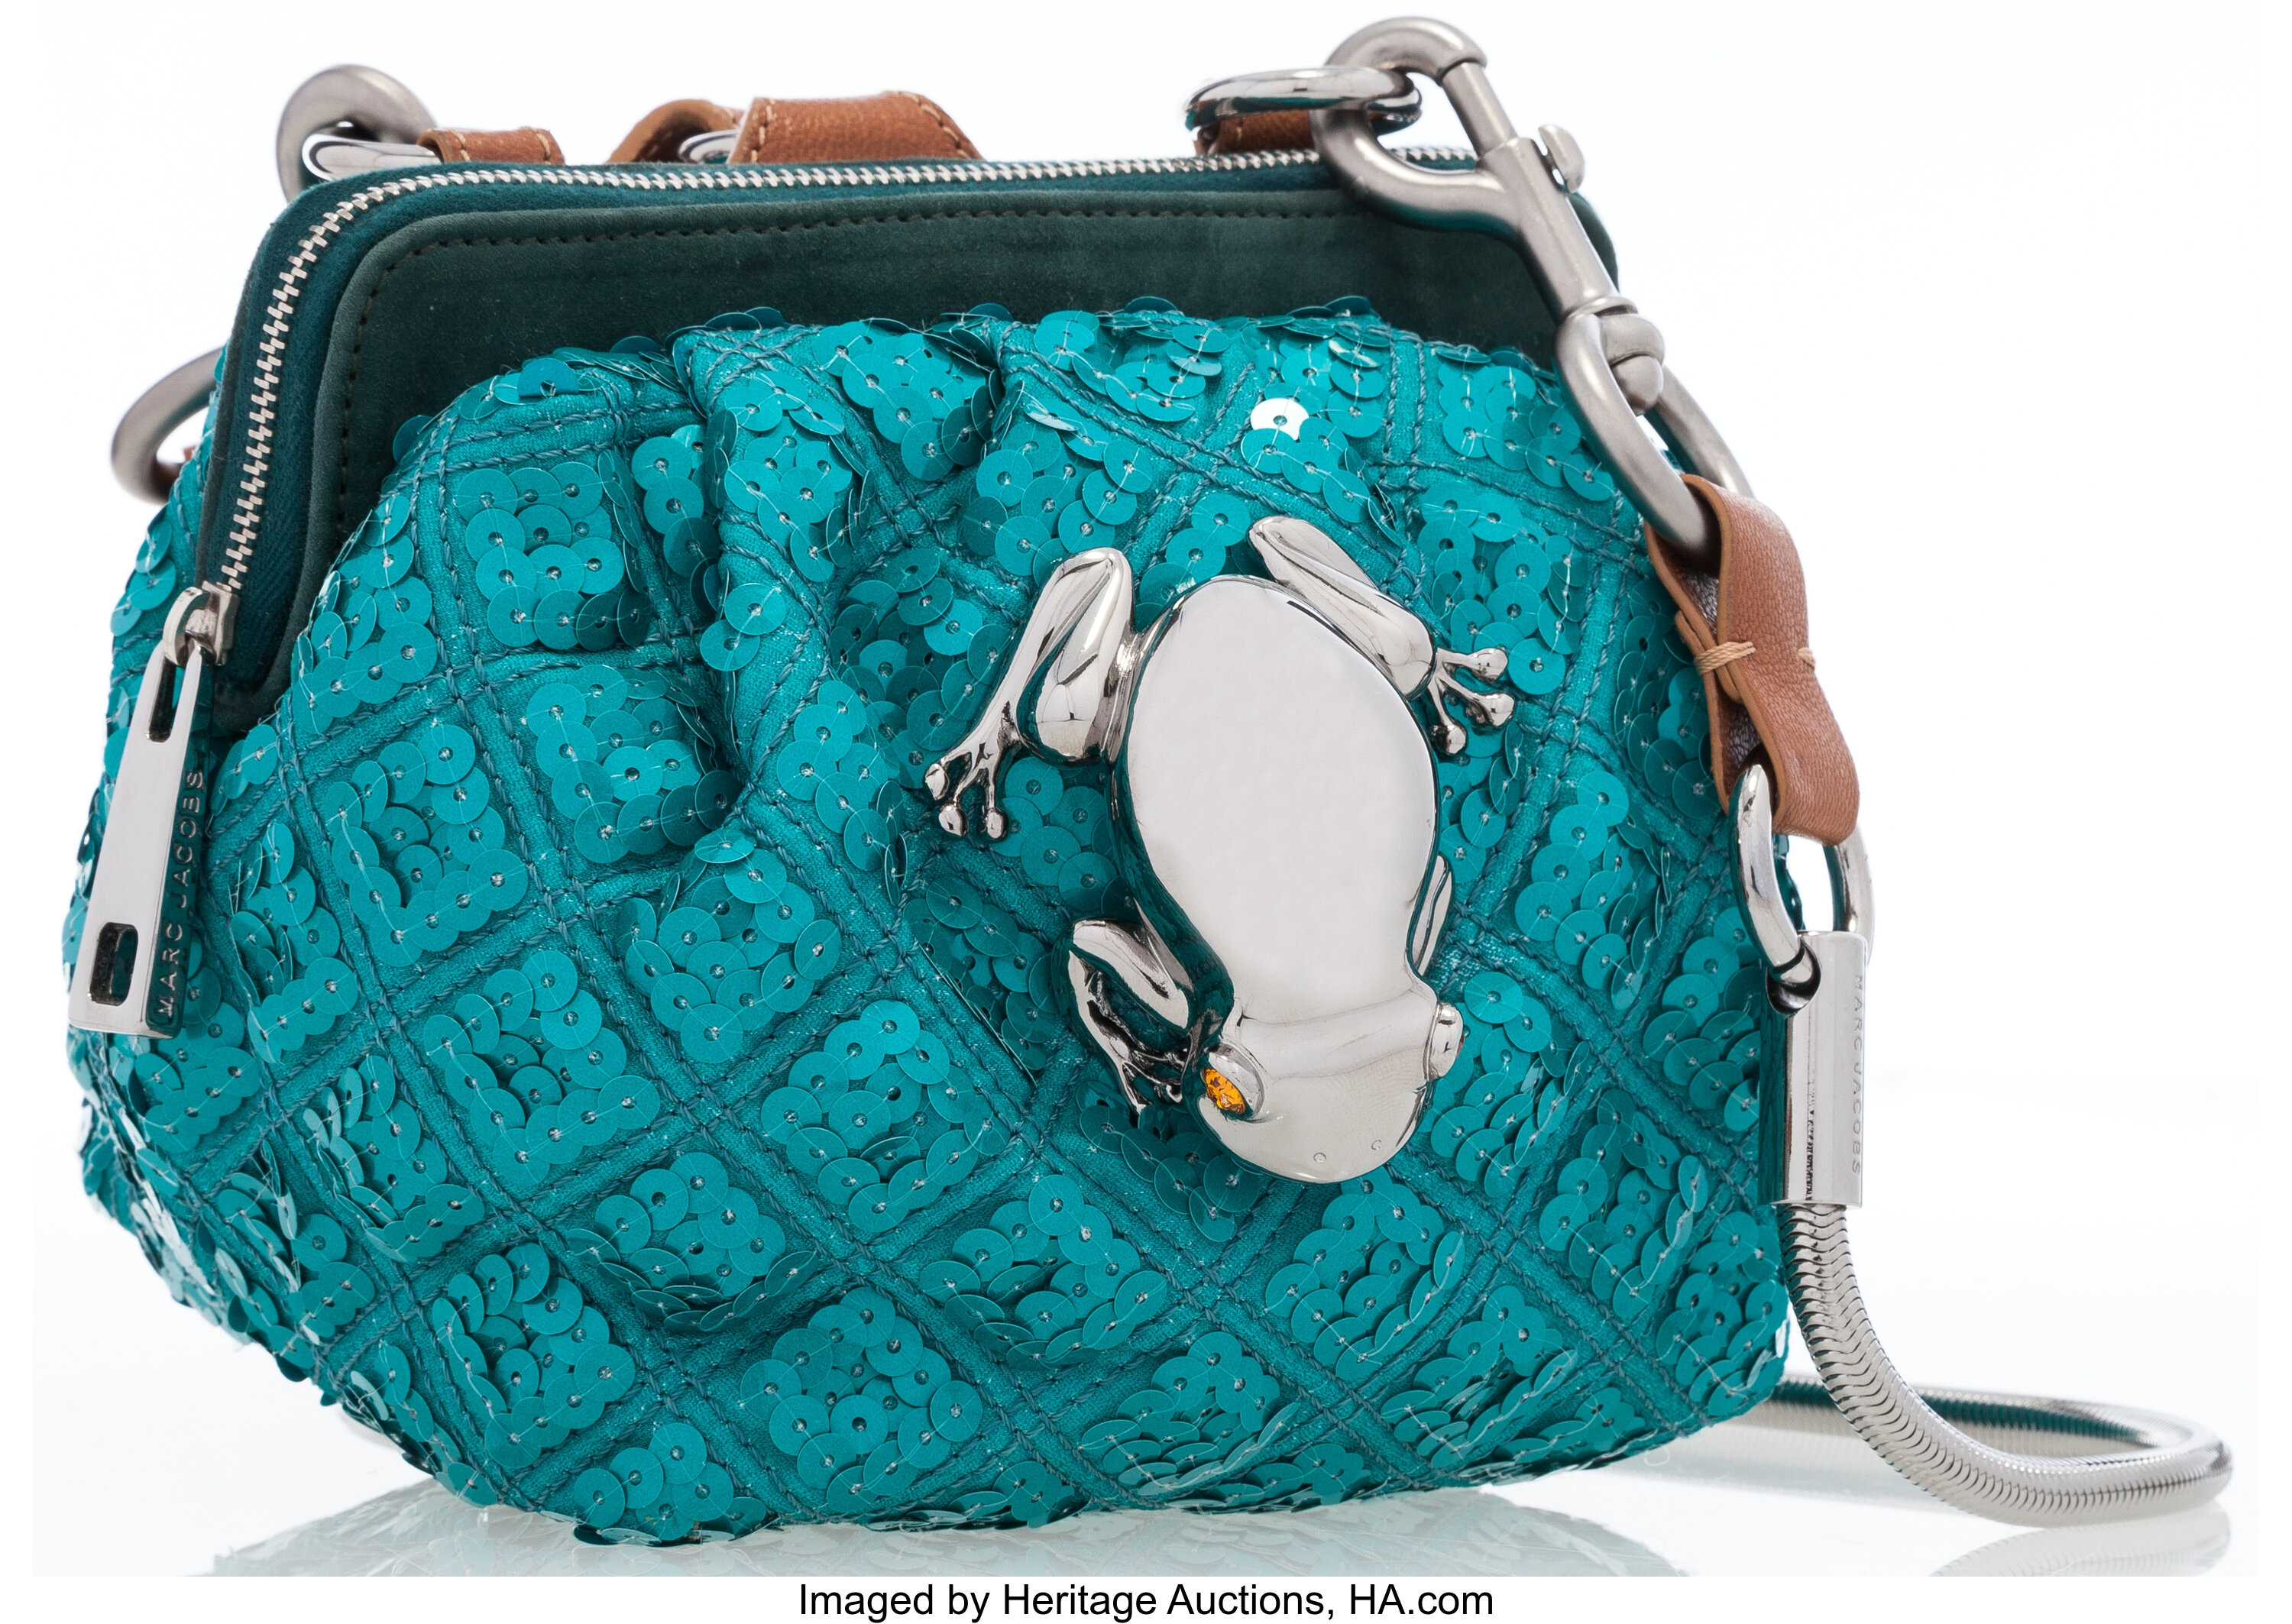 THE J Marc Shoulder Bag in Green Glow, Byzantium, and Ice Blue